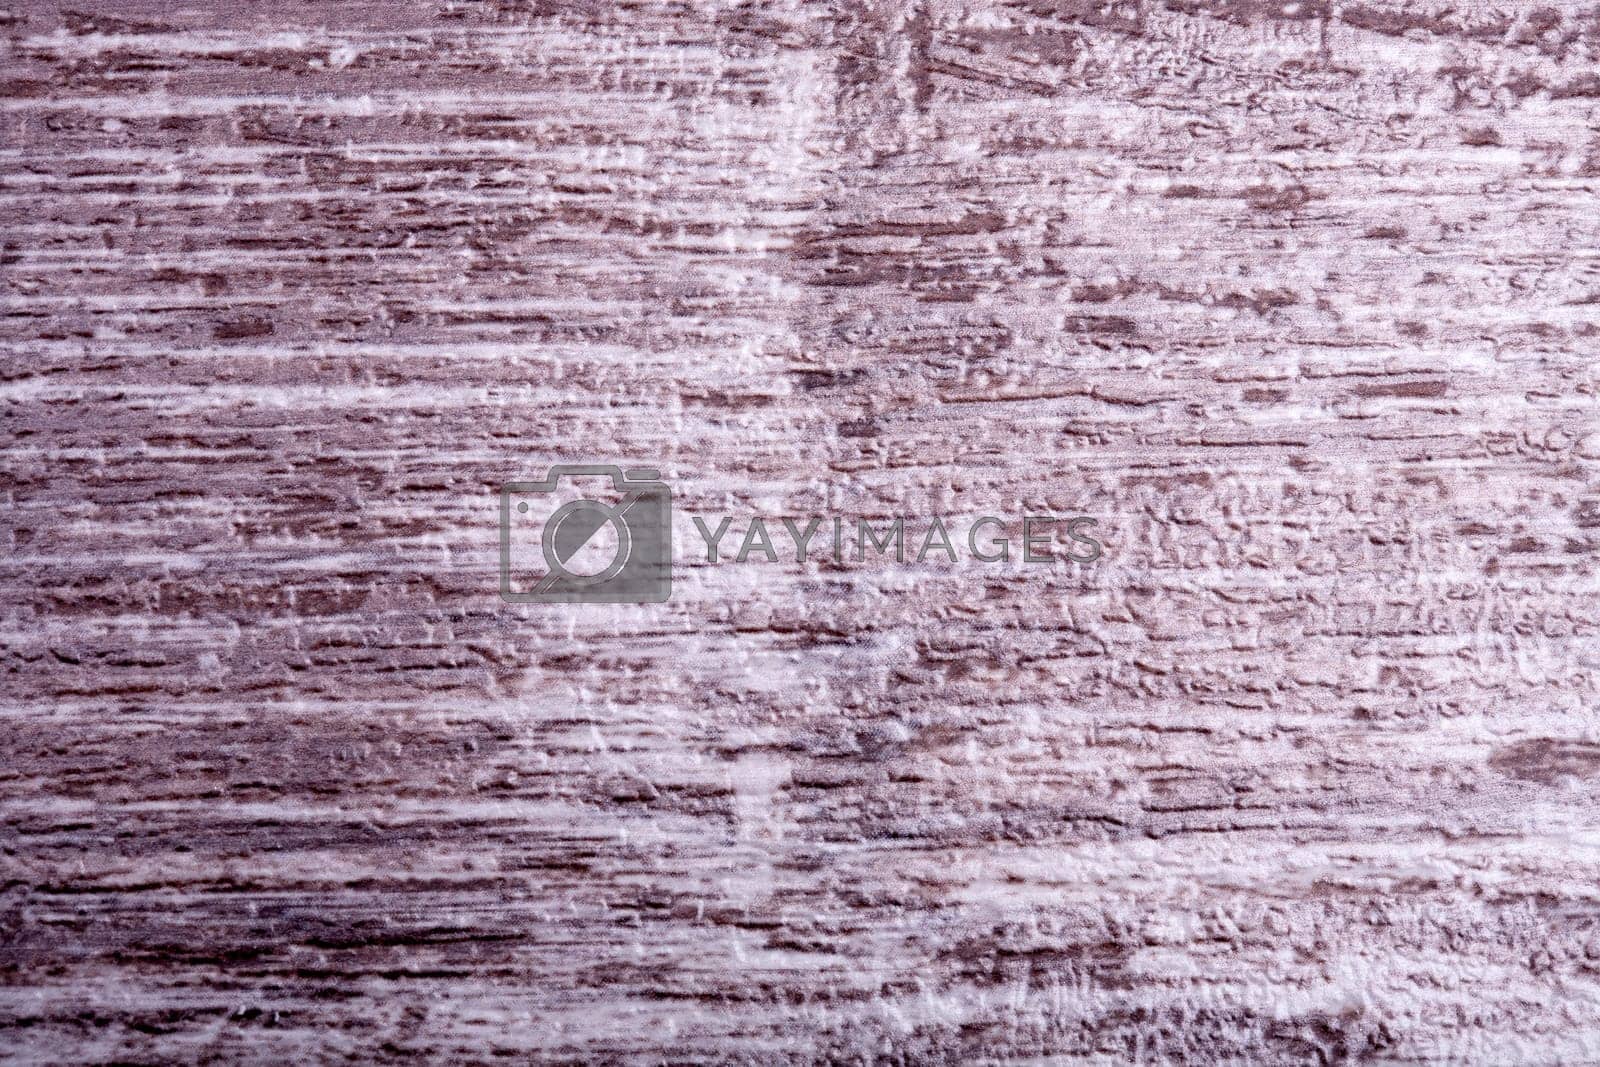 Royalty free image of wooden vintage texture by DCStudio